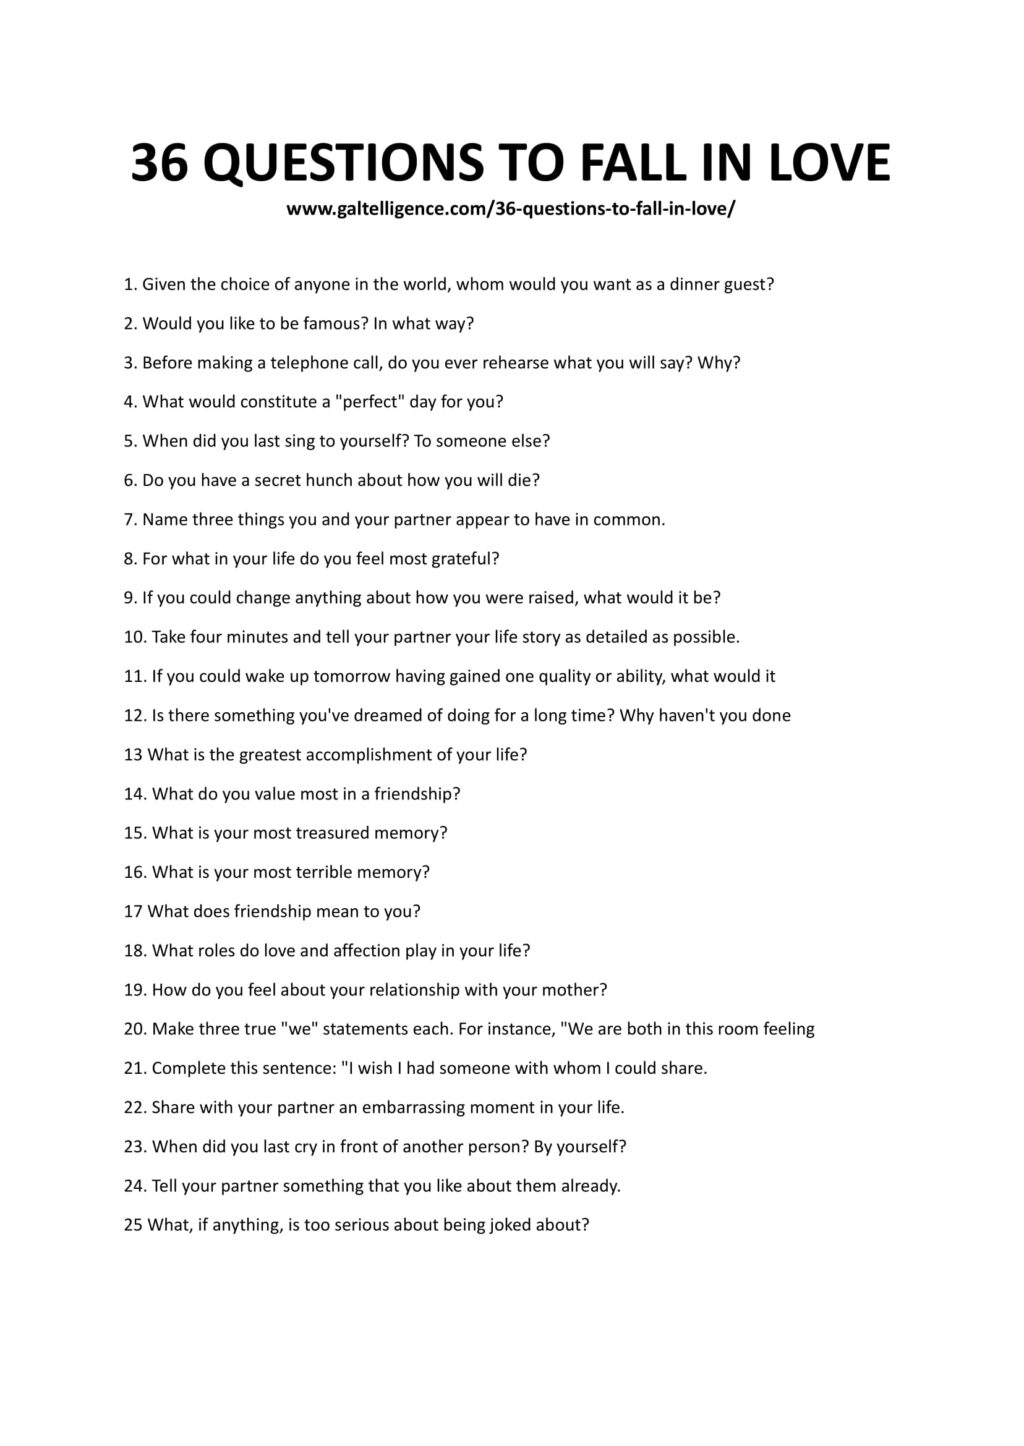 Downloadable and Printable List of 36 Questions to Fall In Love